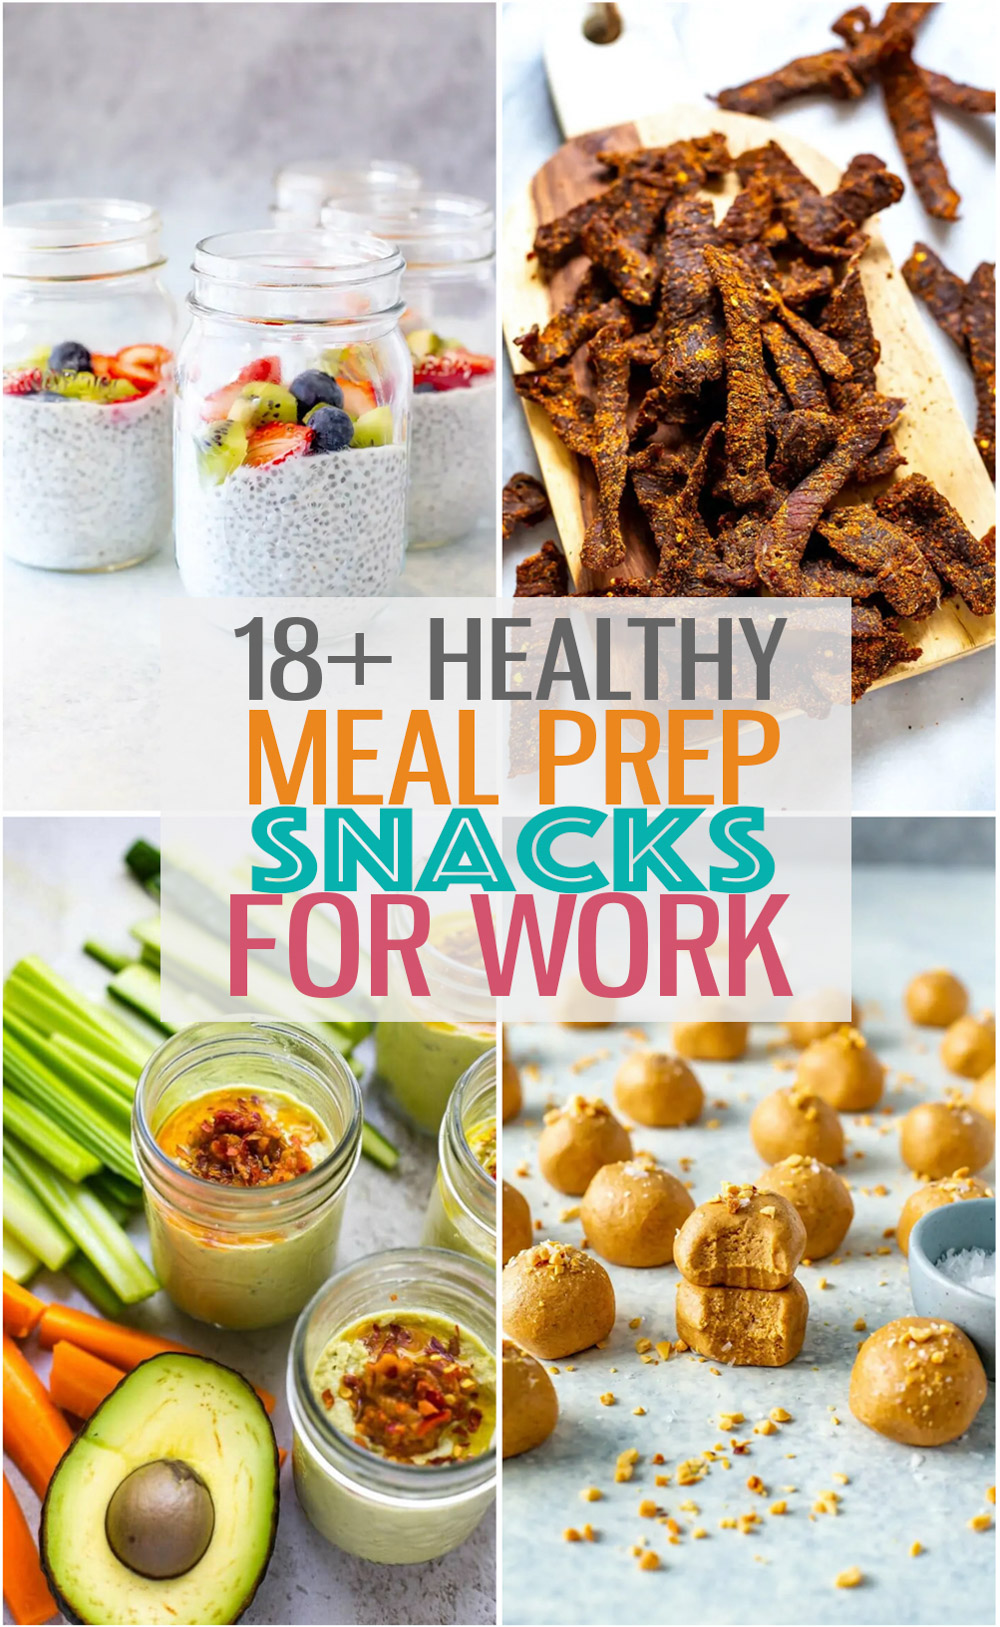 Meal Prep Healthy Snacks for Work